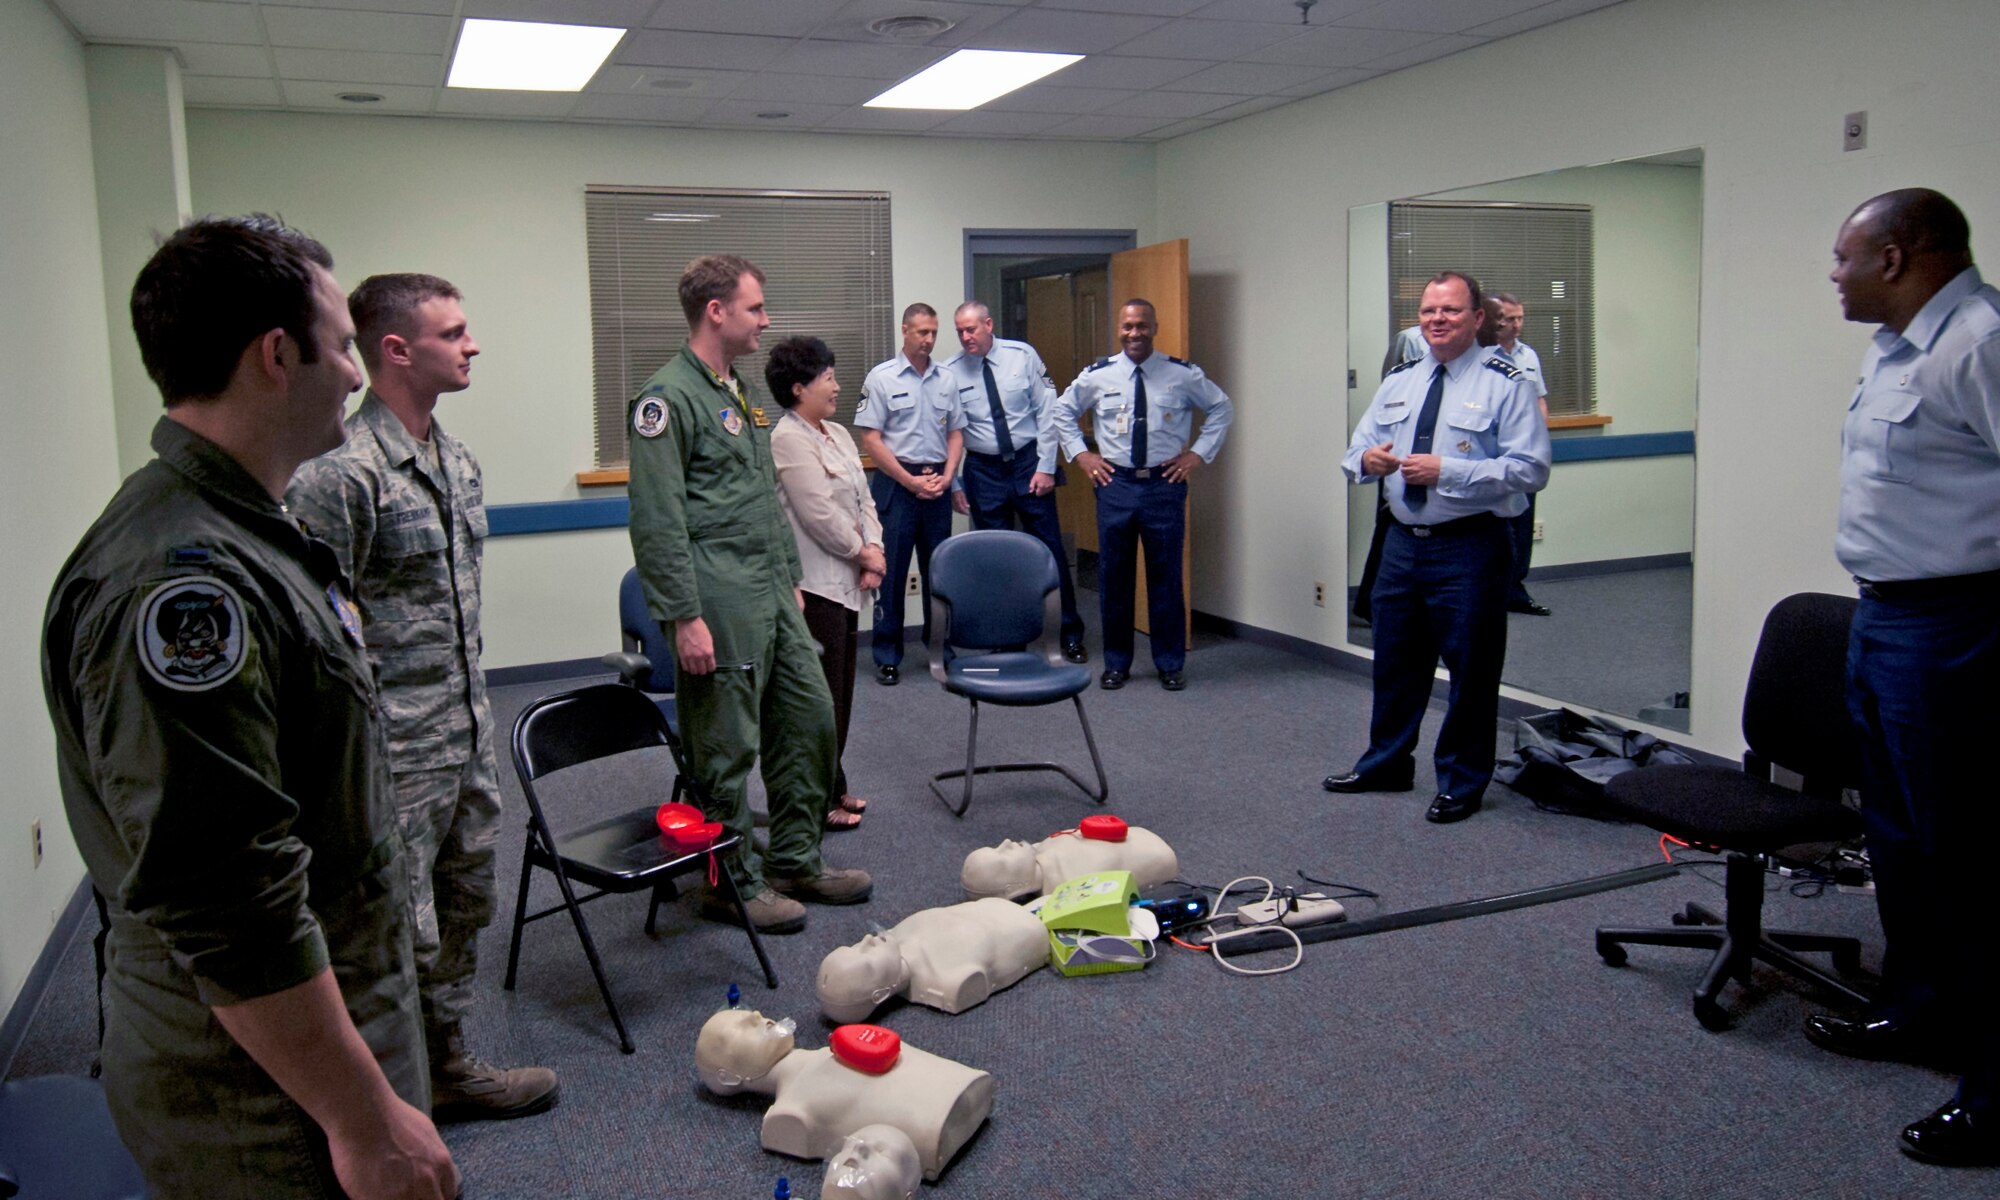 Lt. Gen. Bruce Green, center, Air Force surgeon general, greets a CPR class at the 8th Medical Group on Kunsan Air Base, Republic of Korea, May 9, 2012. The general stopped by several sections of the 8th MDG to greet Airmen and civilian workers. (U.S. Air Force photo/Senior Airman Jessica Hines)   